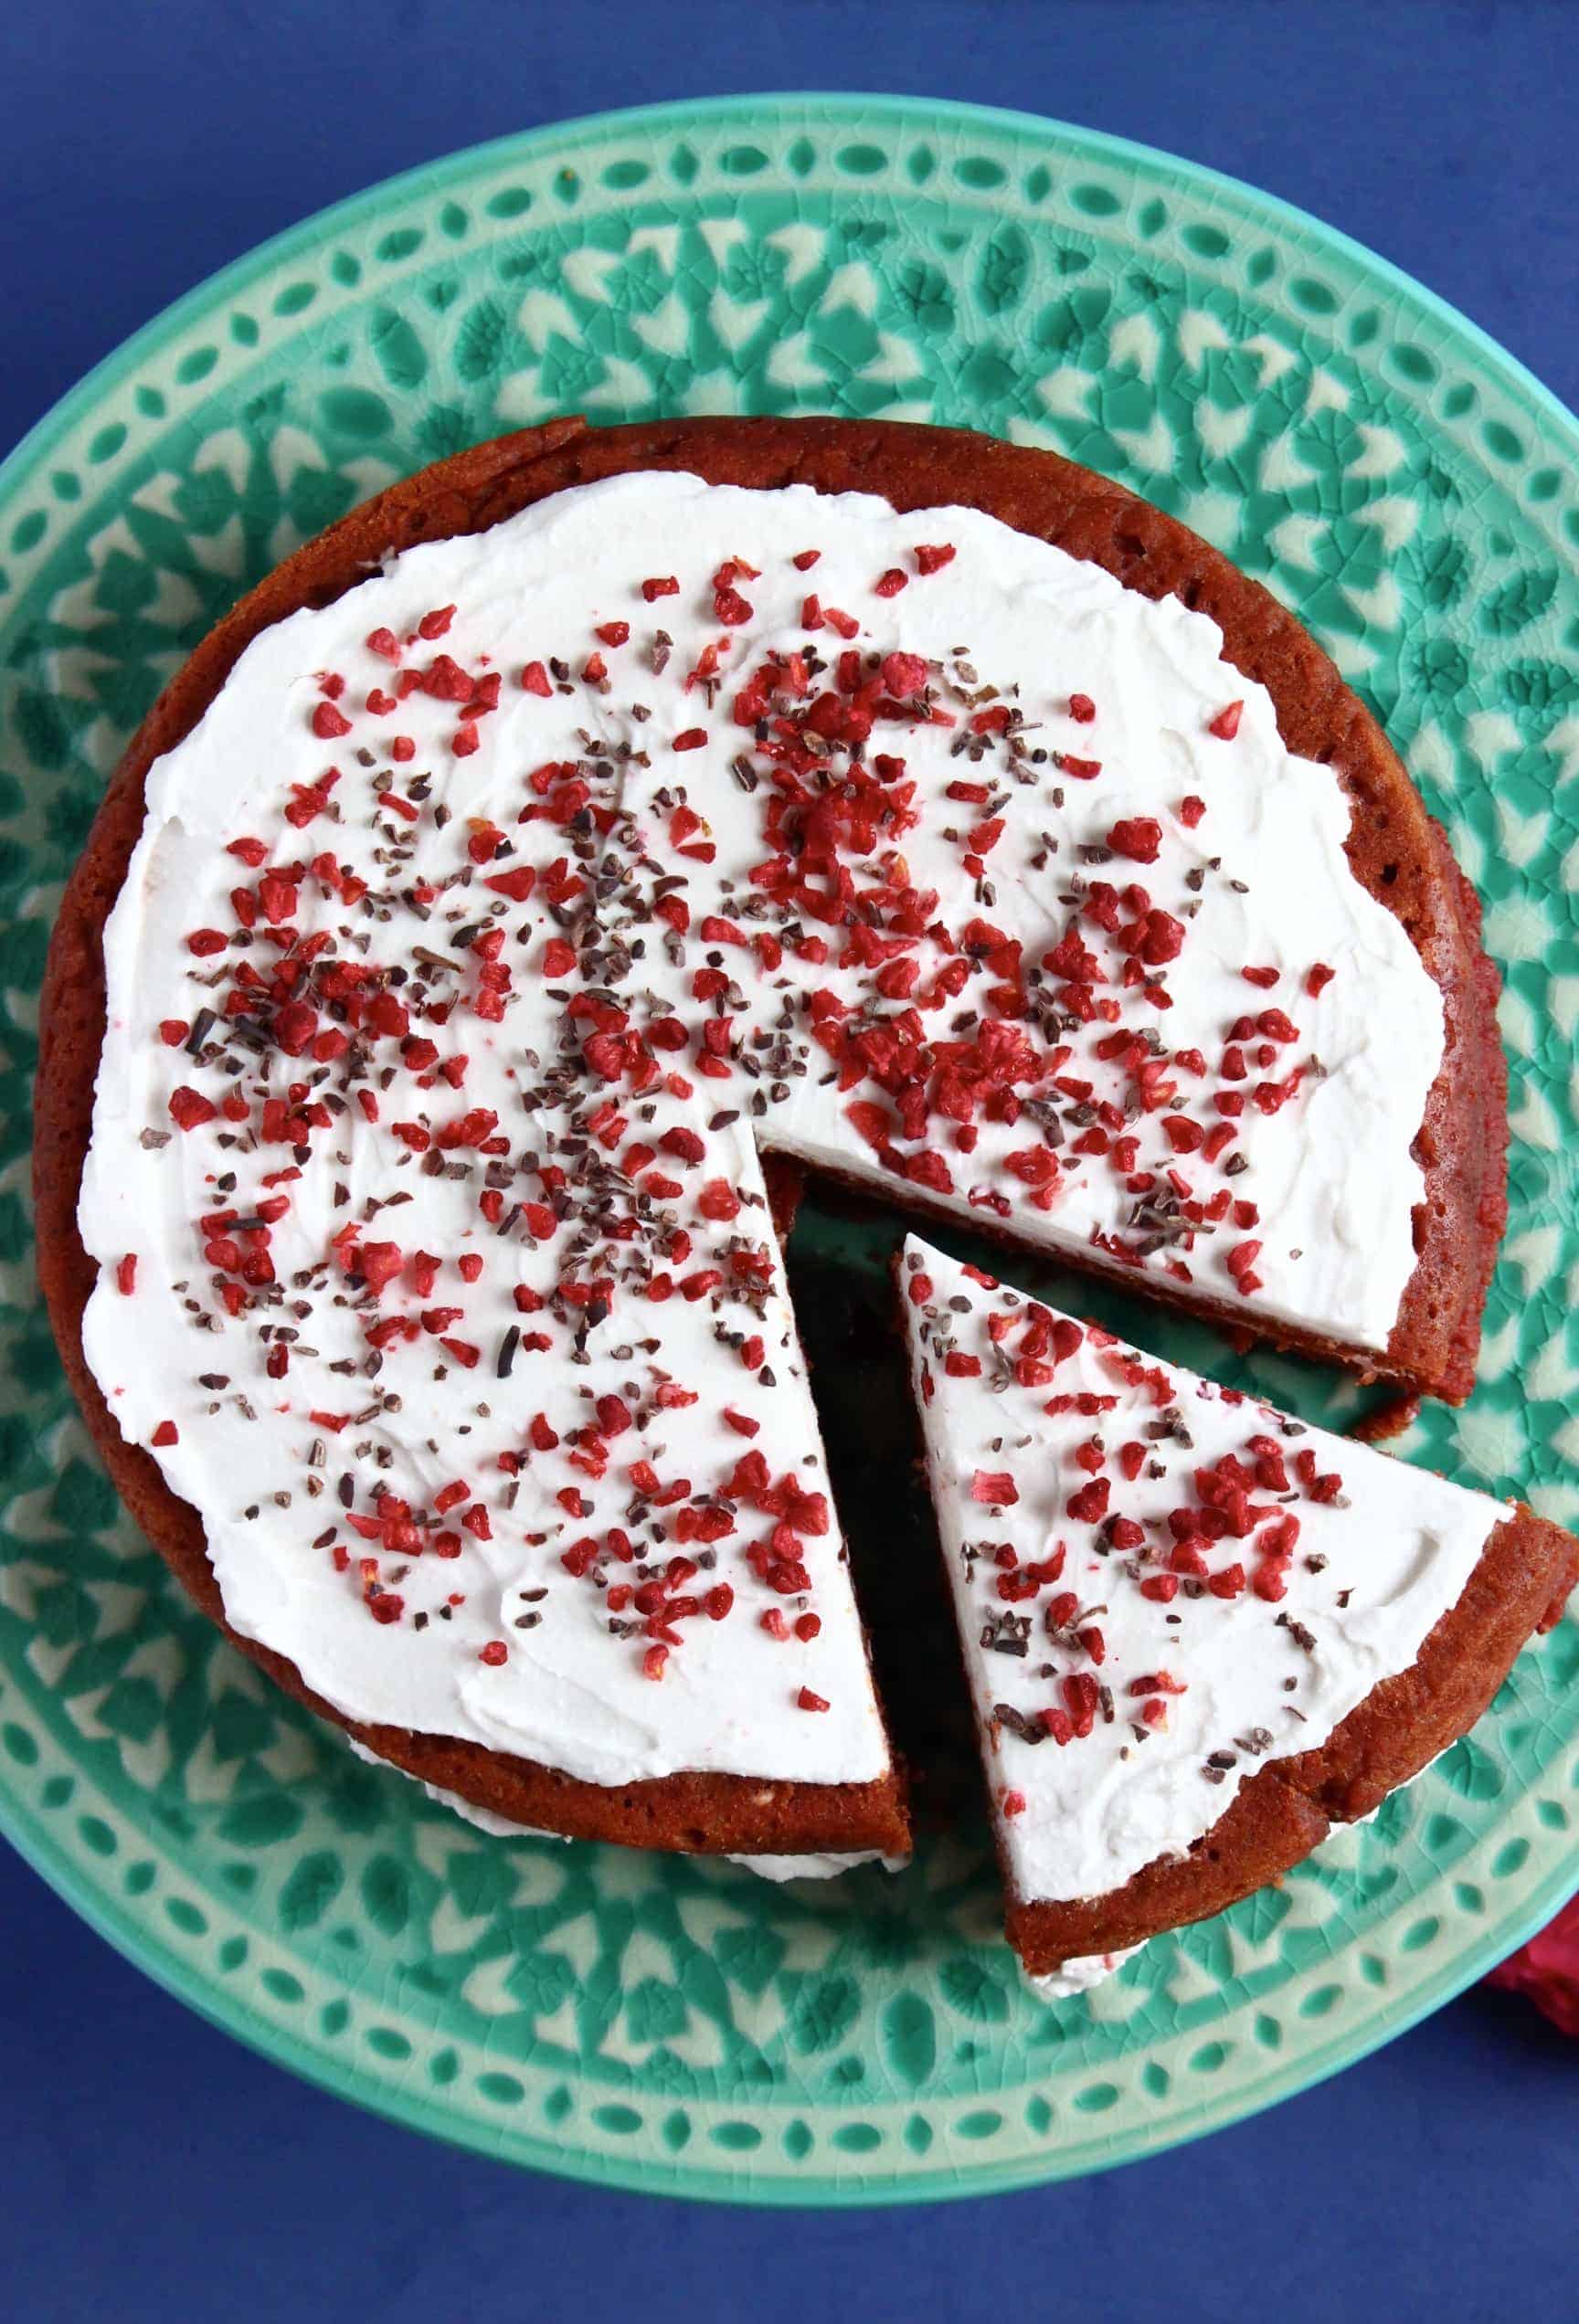 A gluten-free vegan red velvet cake topped on a cake stand with a slice taken out of it 